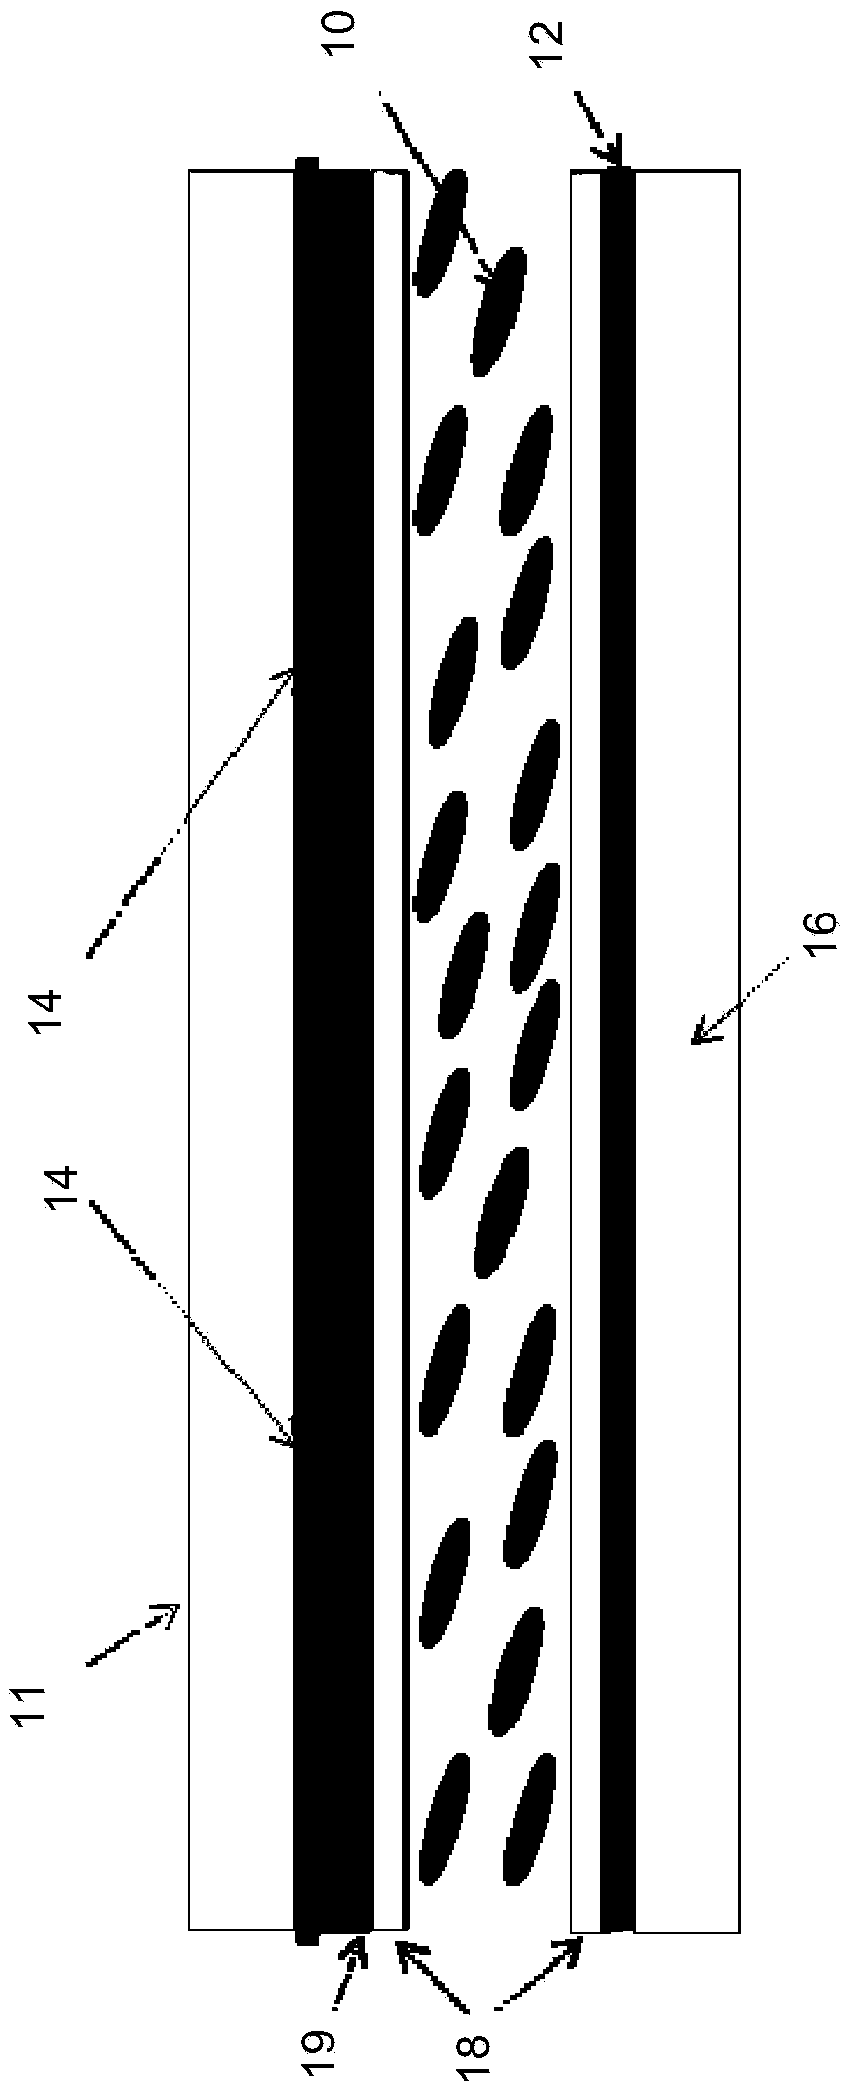 Multiple cell liquid crystal optical device with coupled electric field control